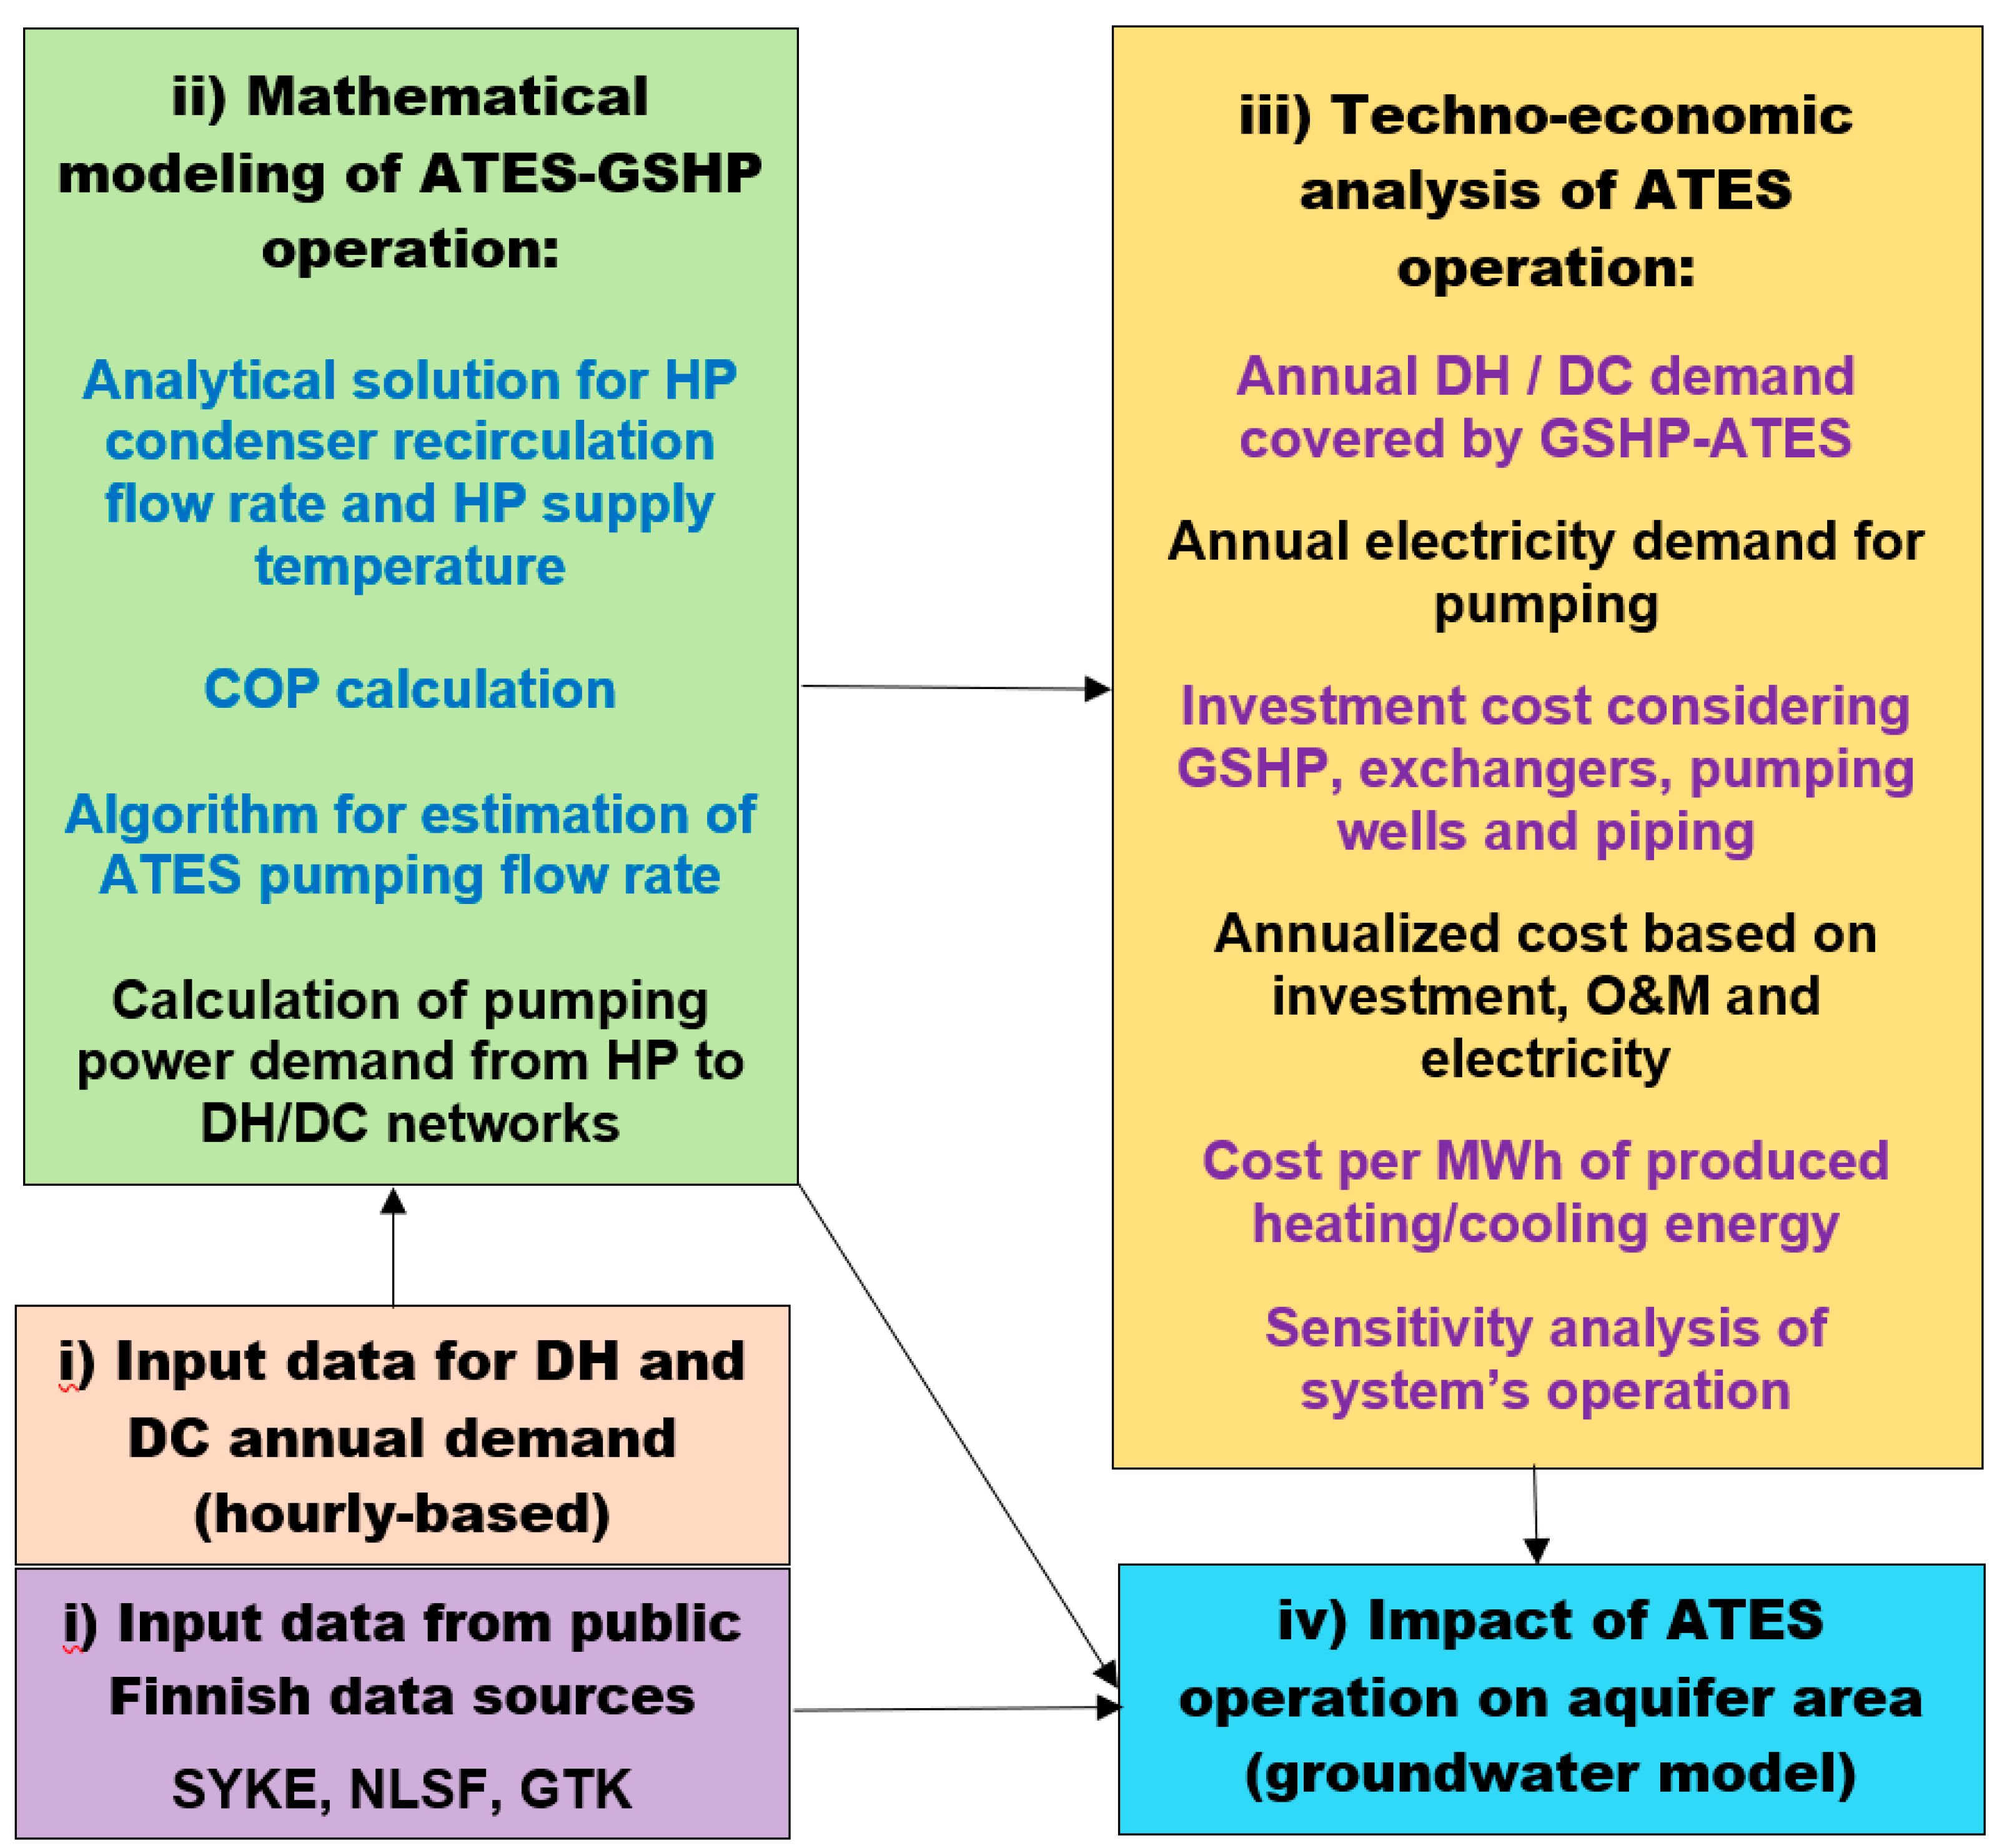 Energies Free Full Text Aquifer Thermal Energy Storage Ates For District Heating And Cooling A Novel Modeling Approach Applied In A Case Study Of A Finnish Urban District Html